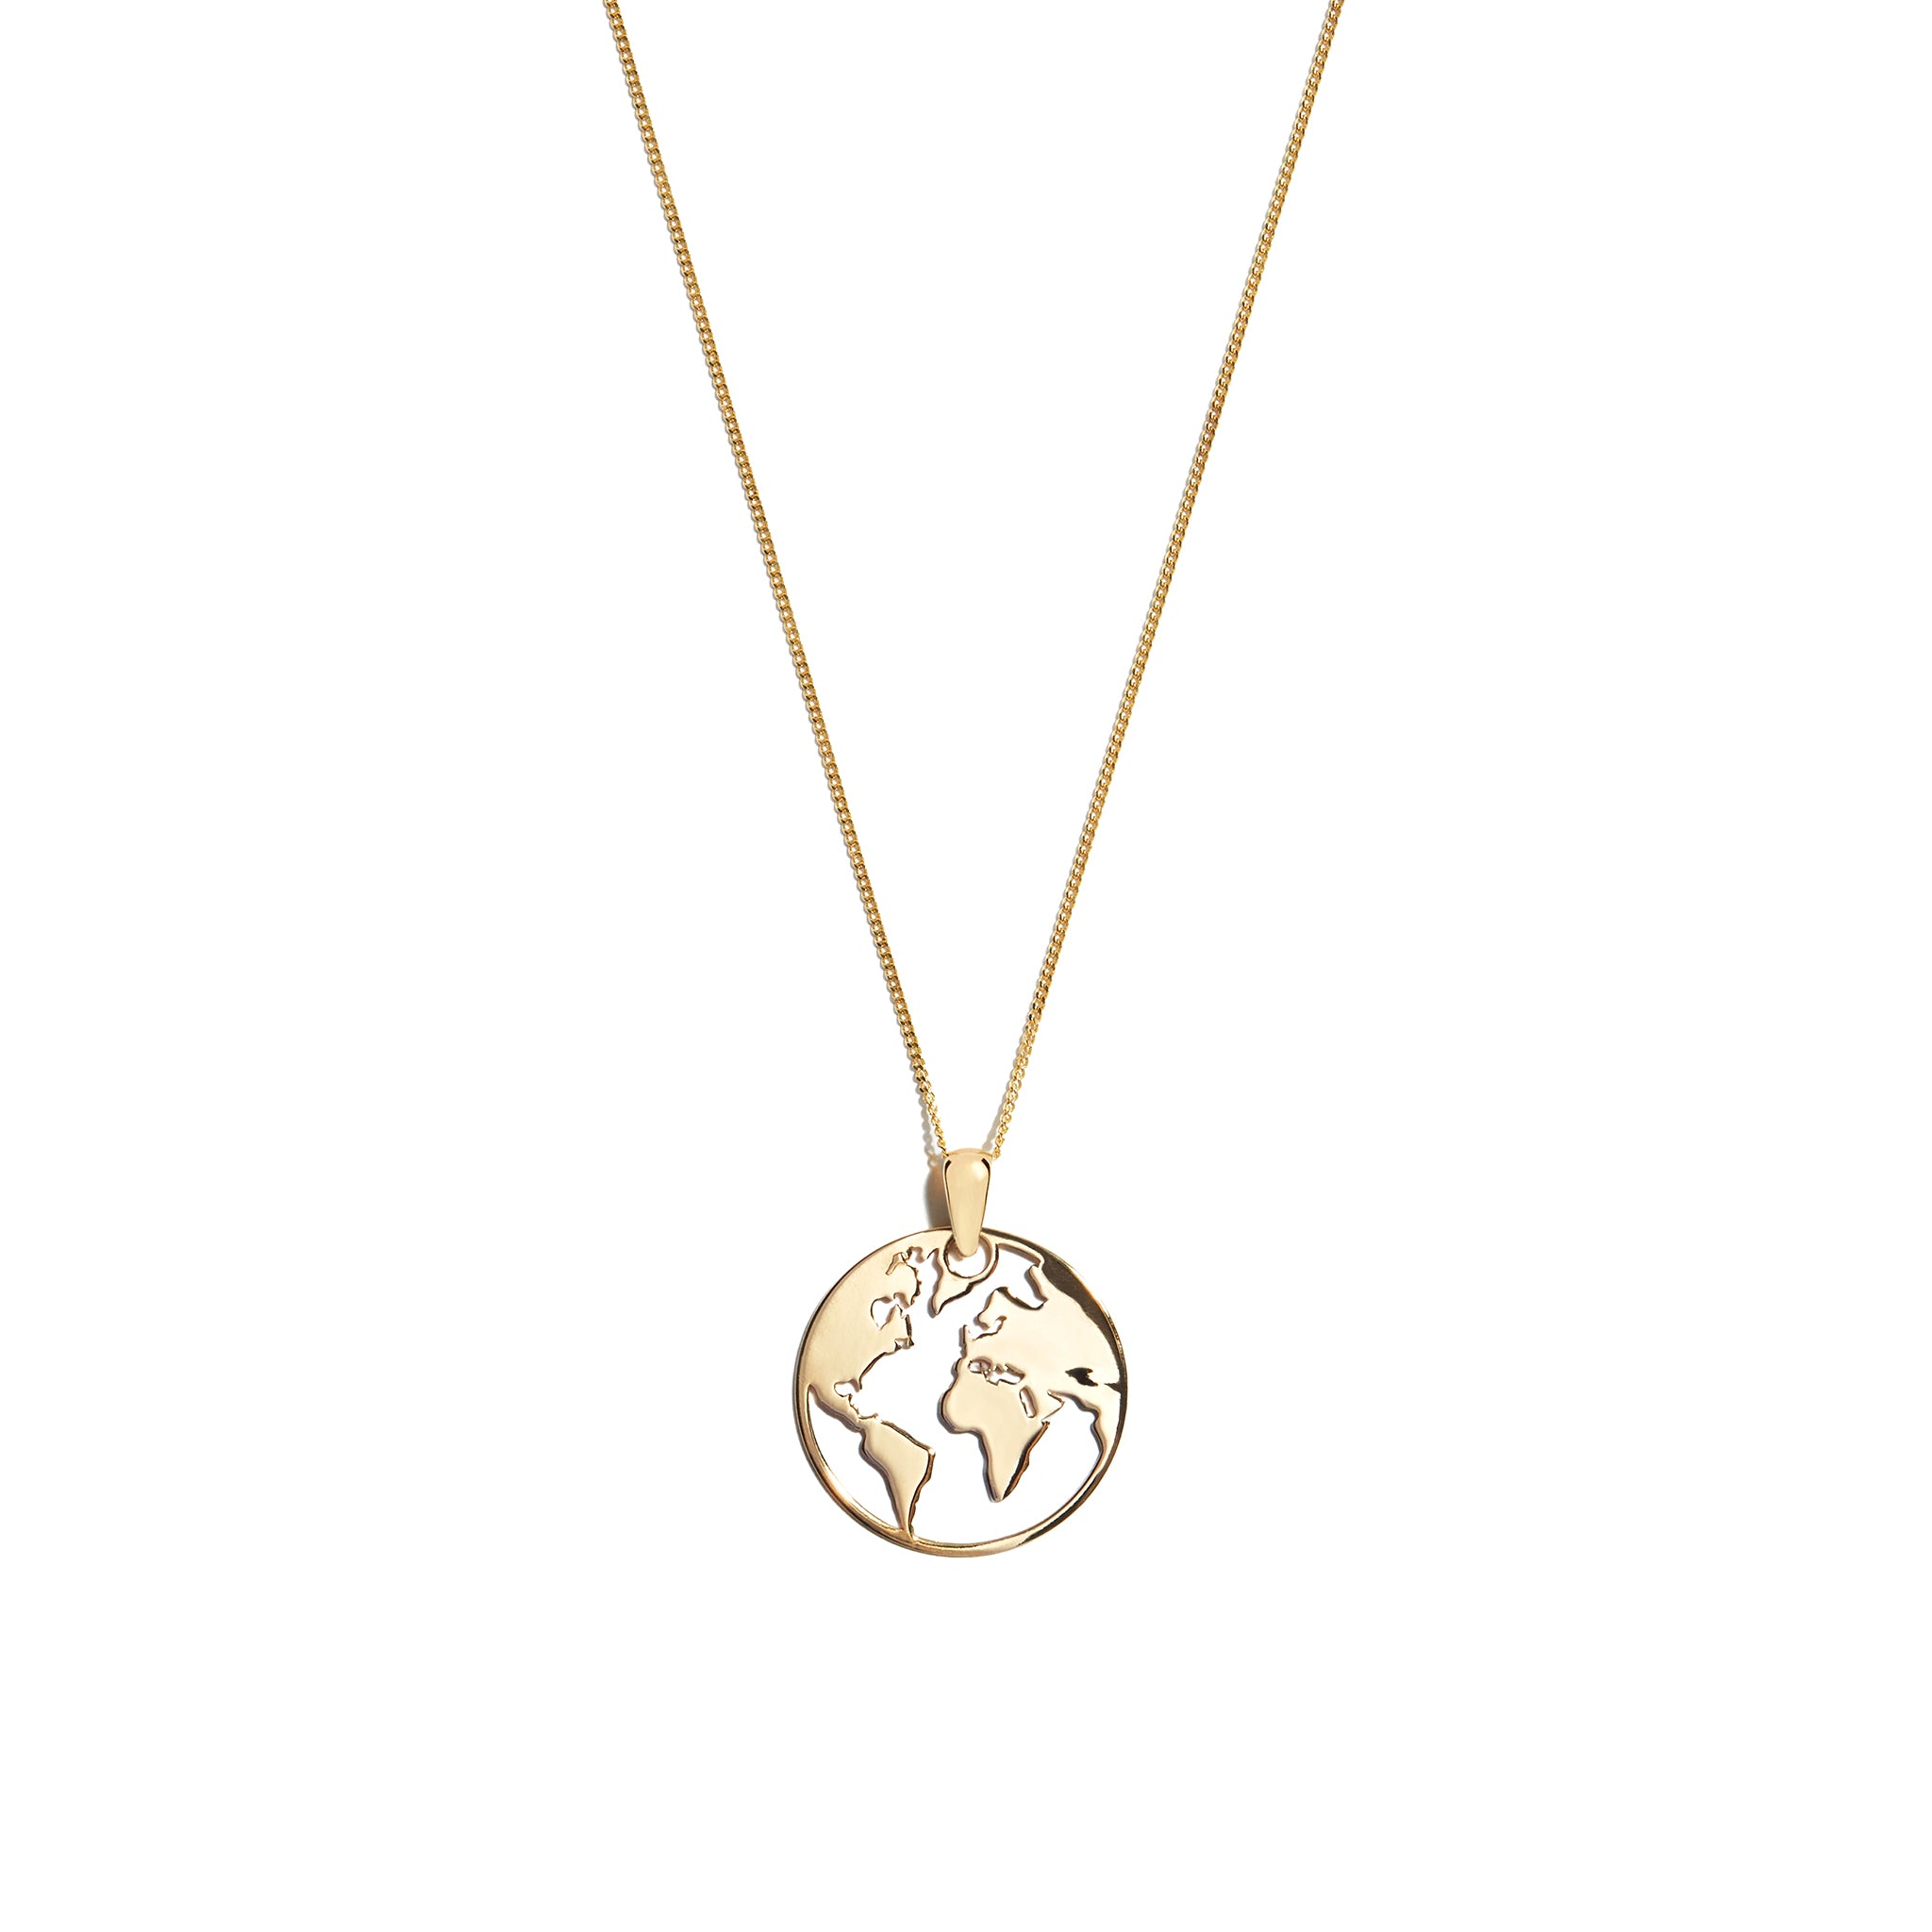 Embrace worldly charm with the 9 carat yellow gold world pendant. This stunning accessory features a detailed globe design, symbolizing exploration and adventure. Elevate your style with this unique and meaningful piece.